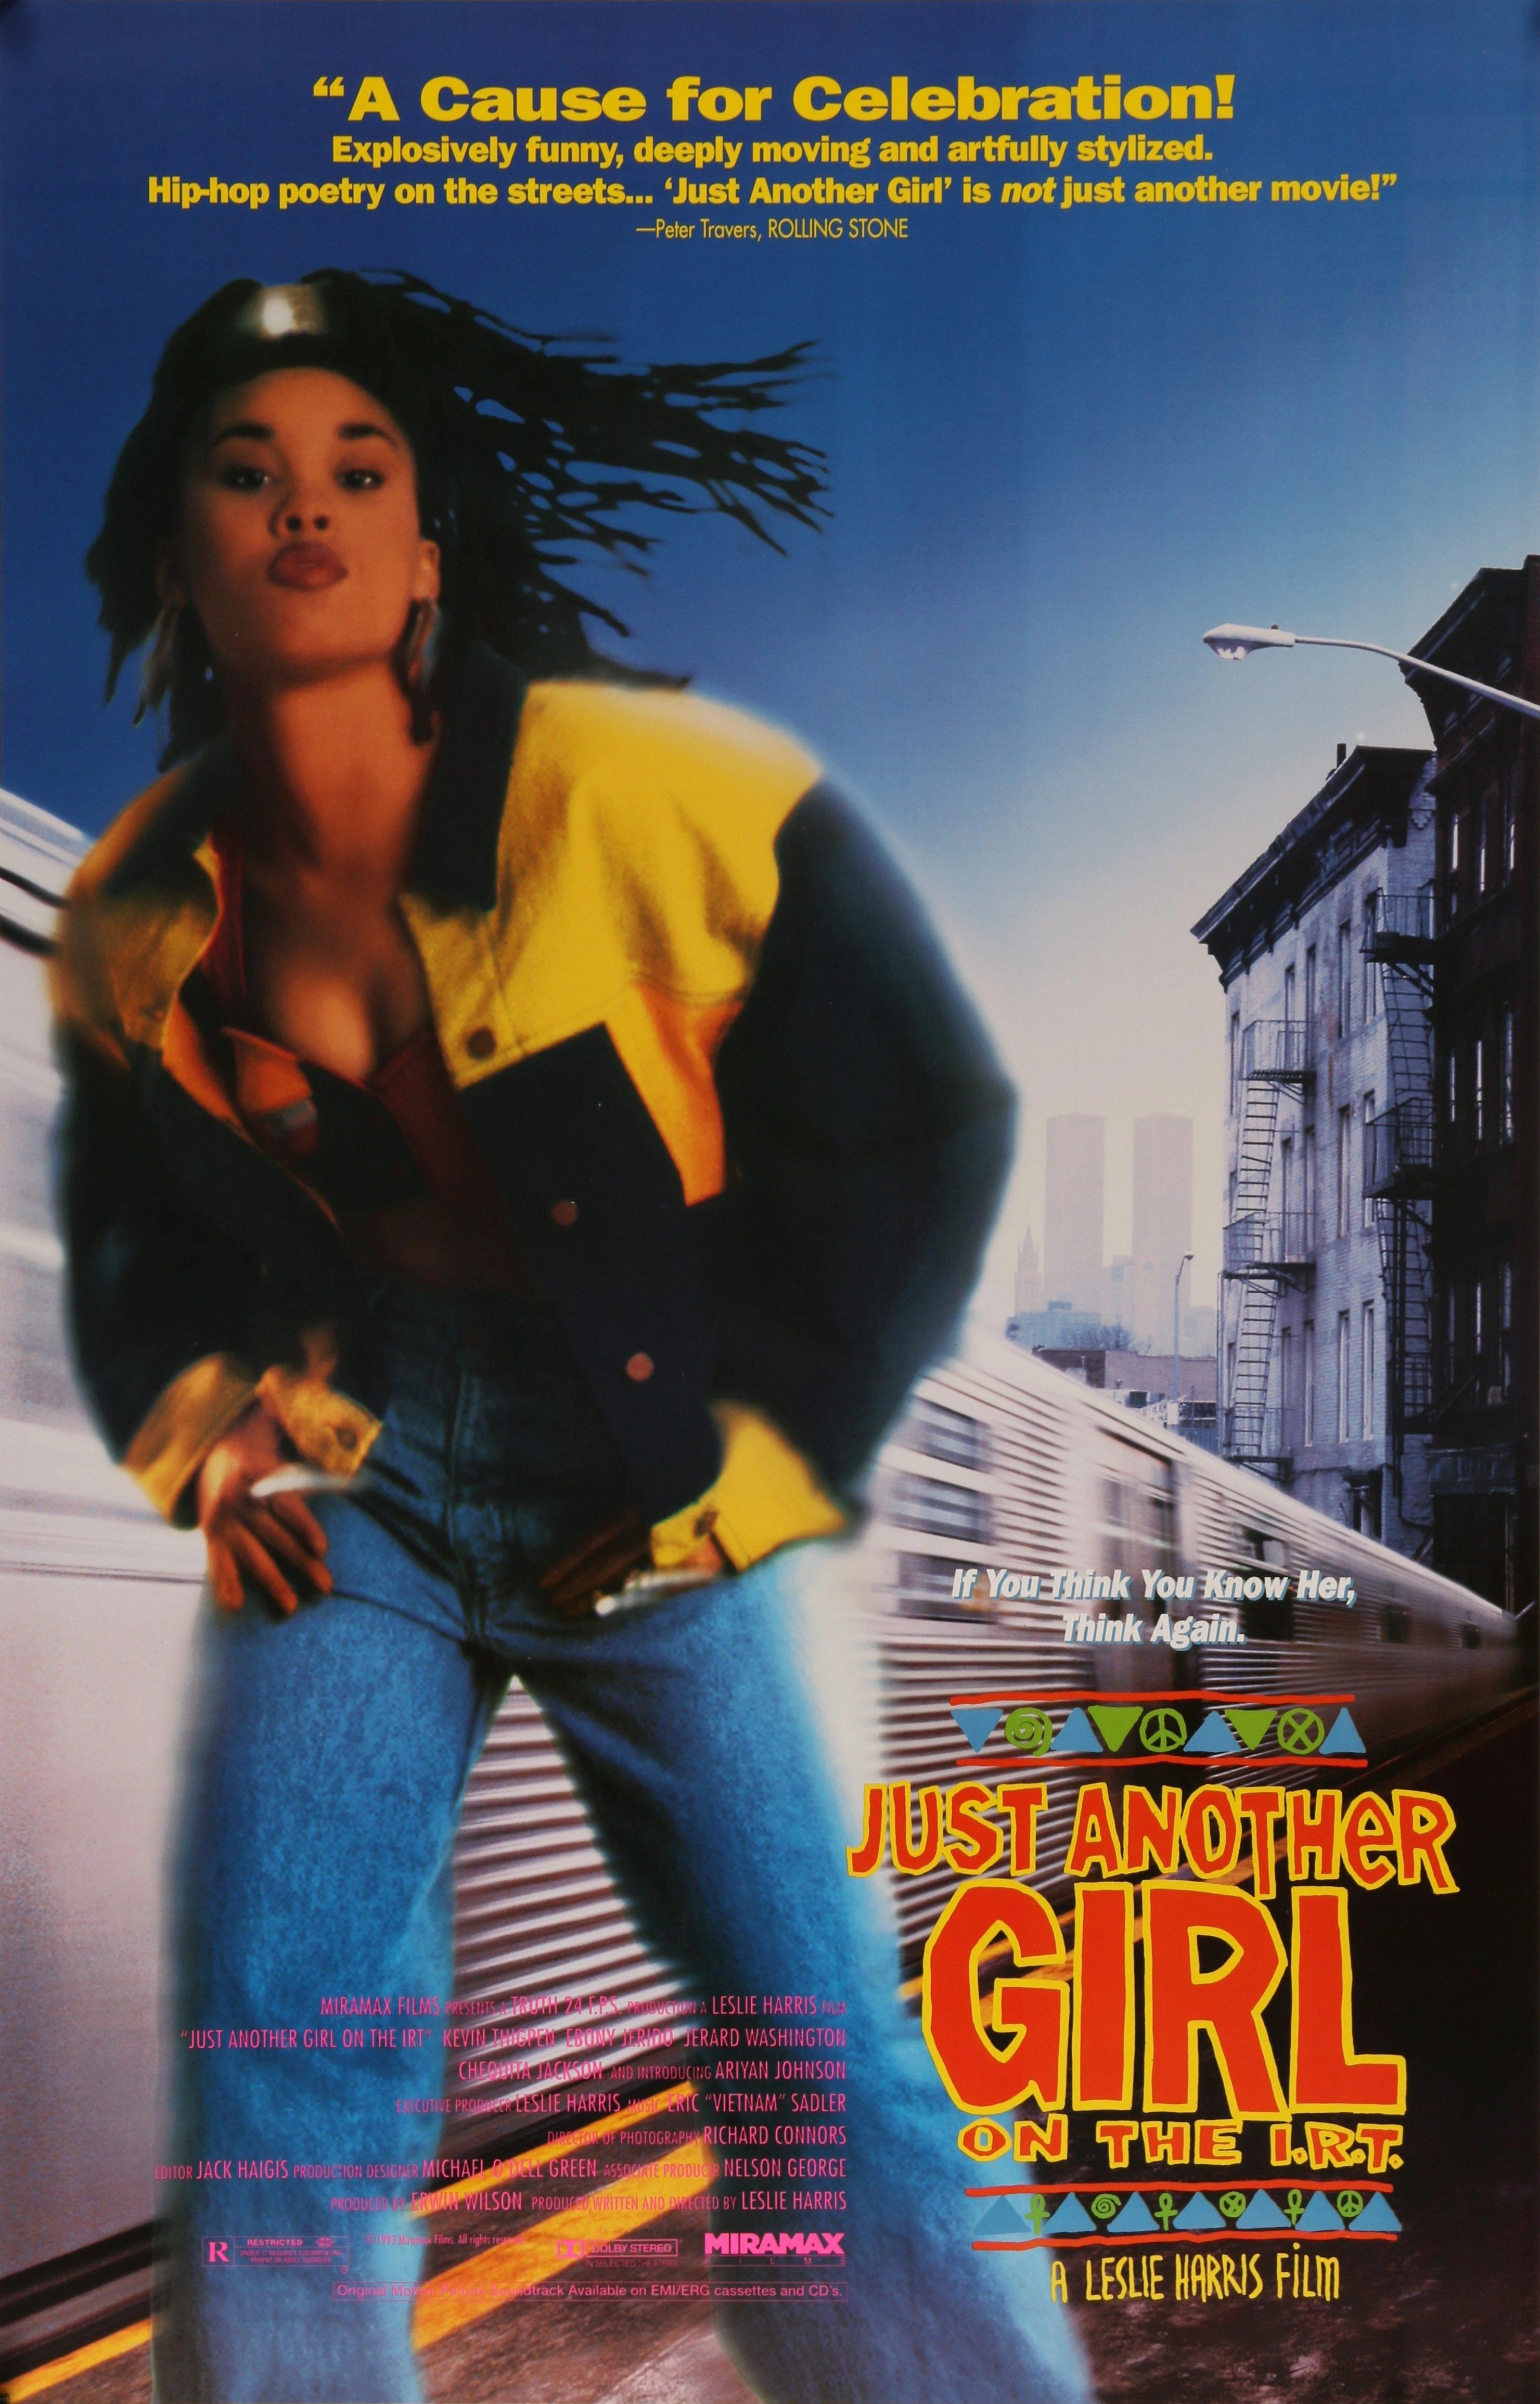 Just Another Girl on the I.R.T. (1992) Screenshot 2